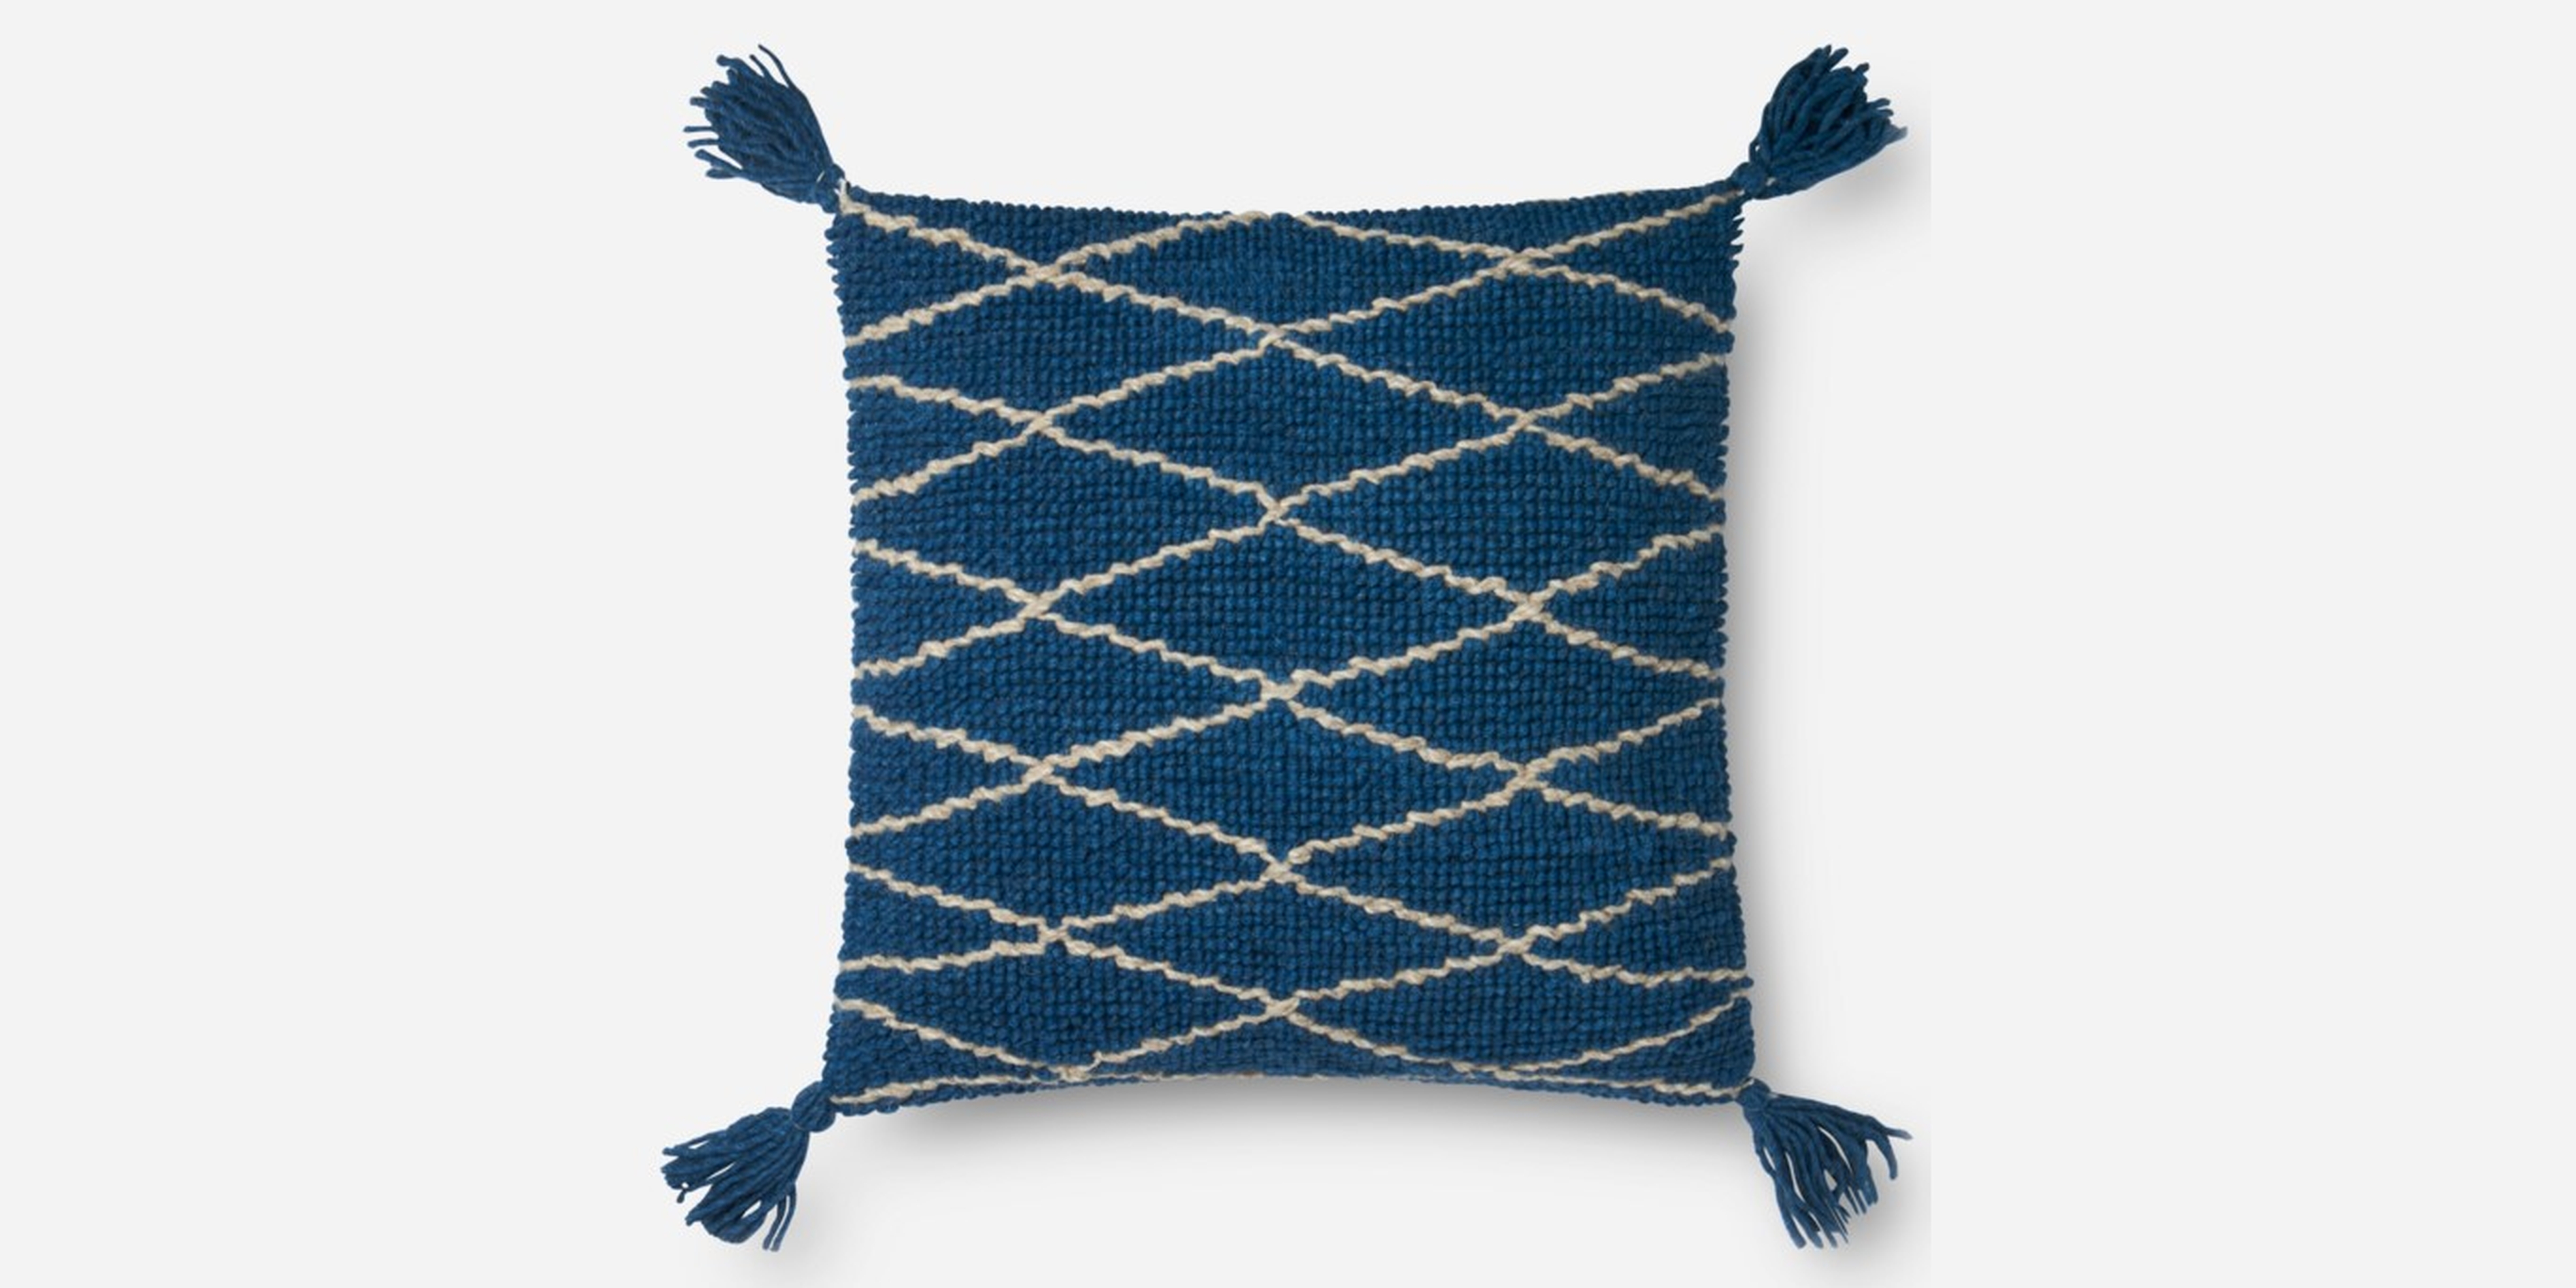 PILLOWS - BLUE - 22" X 22" - with poly insert - Loloi Rugs